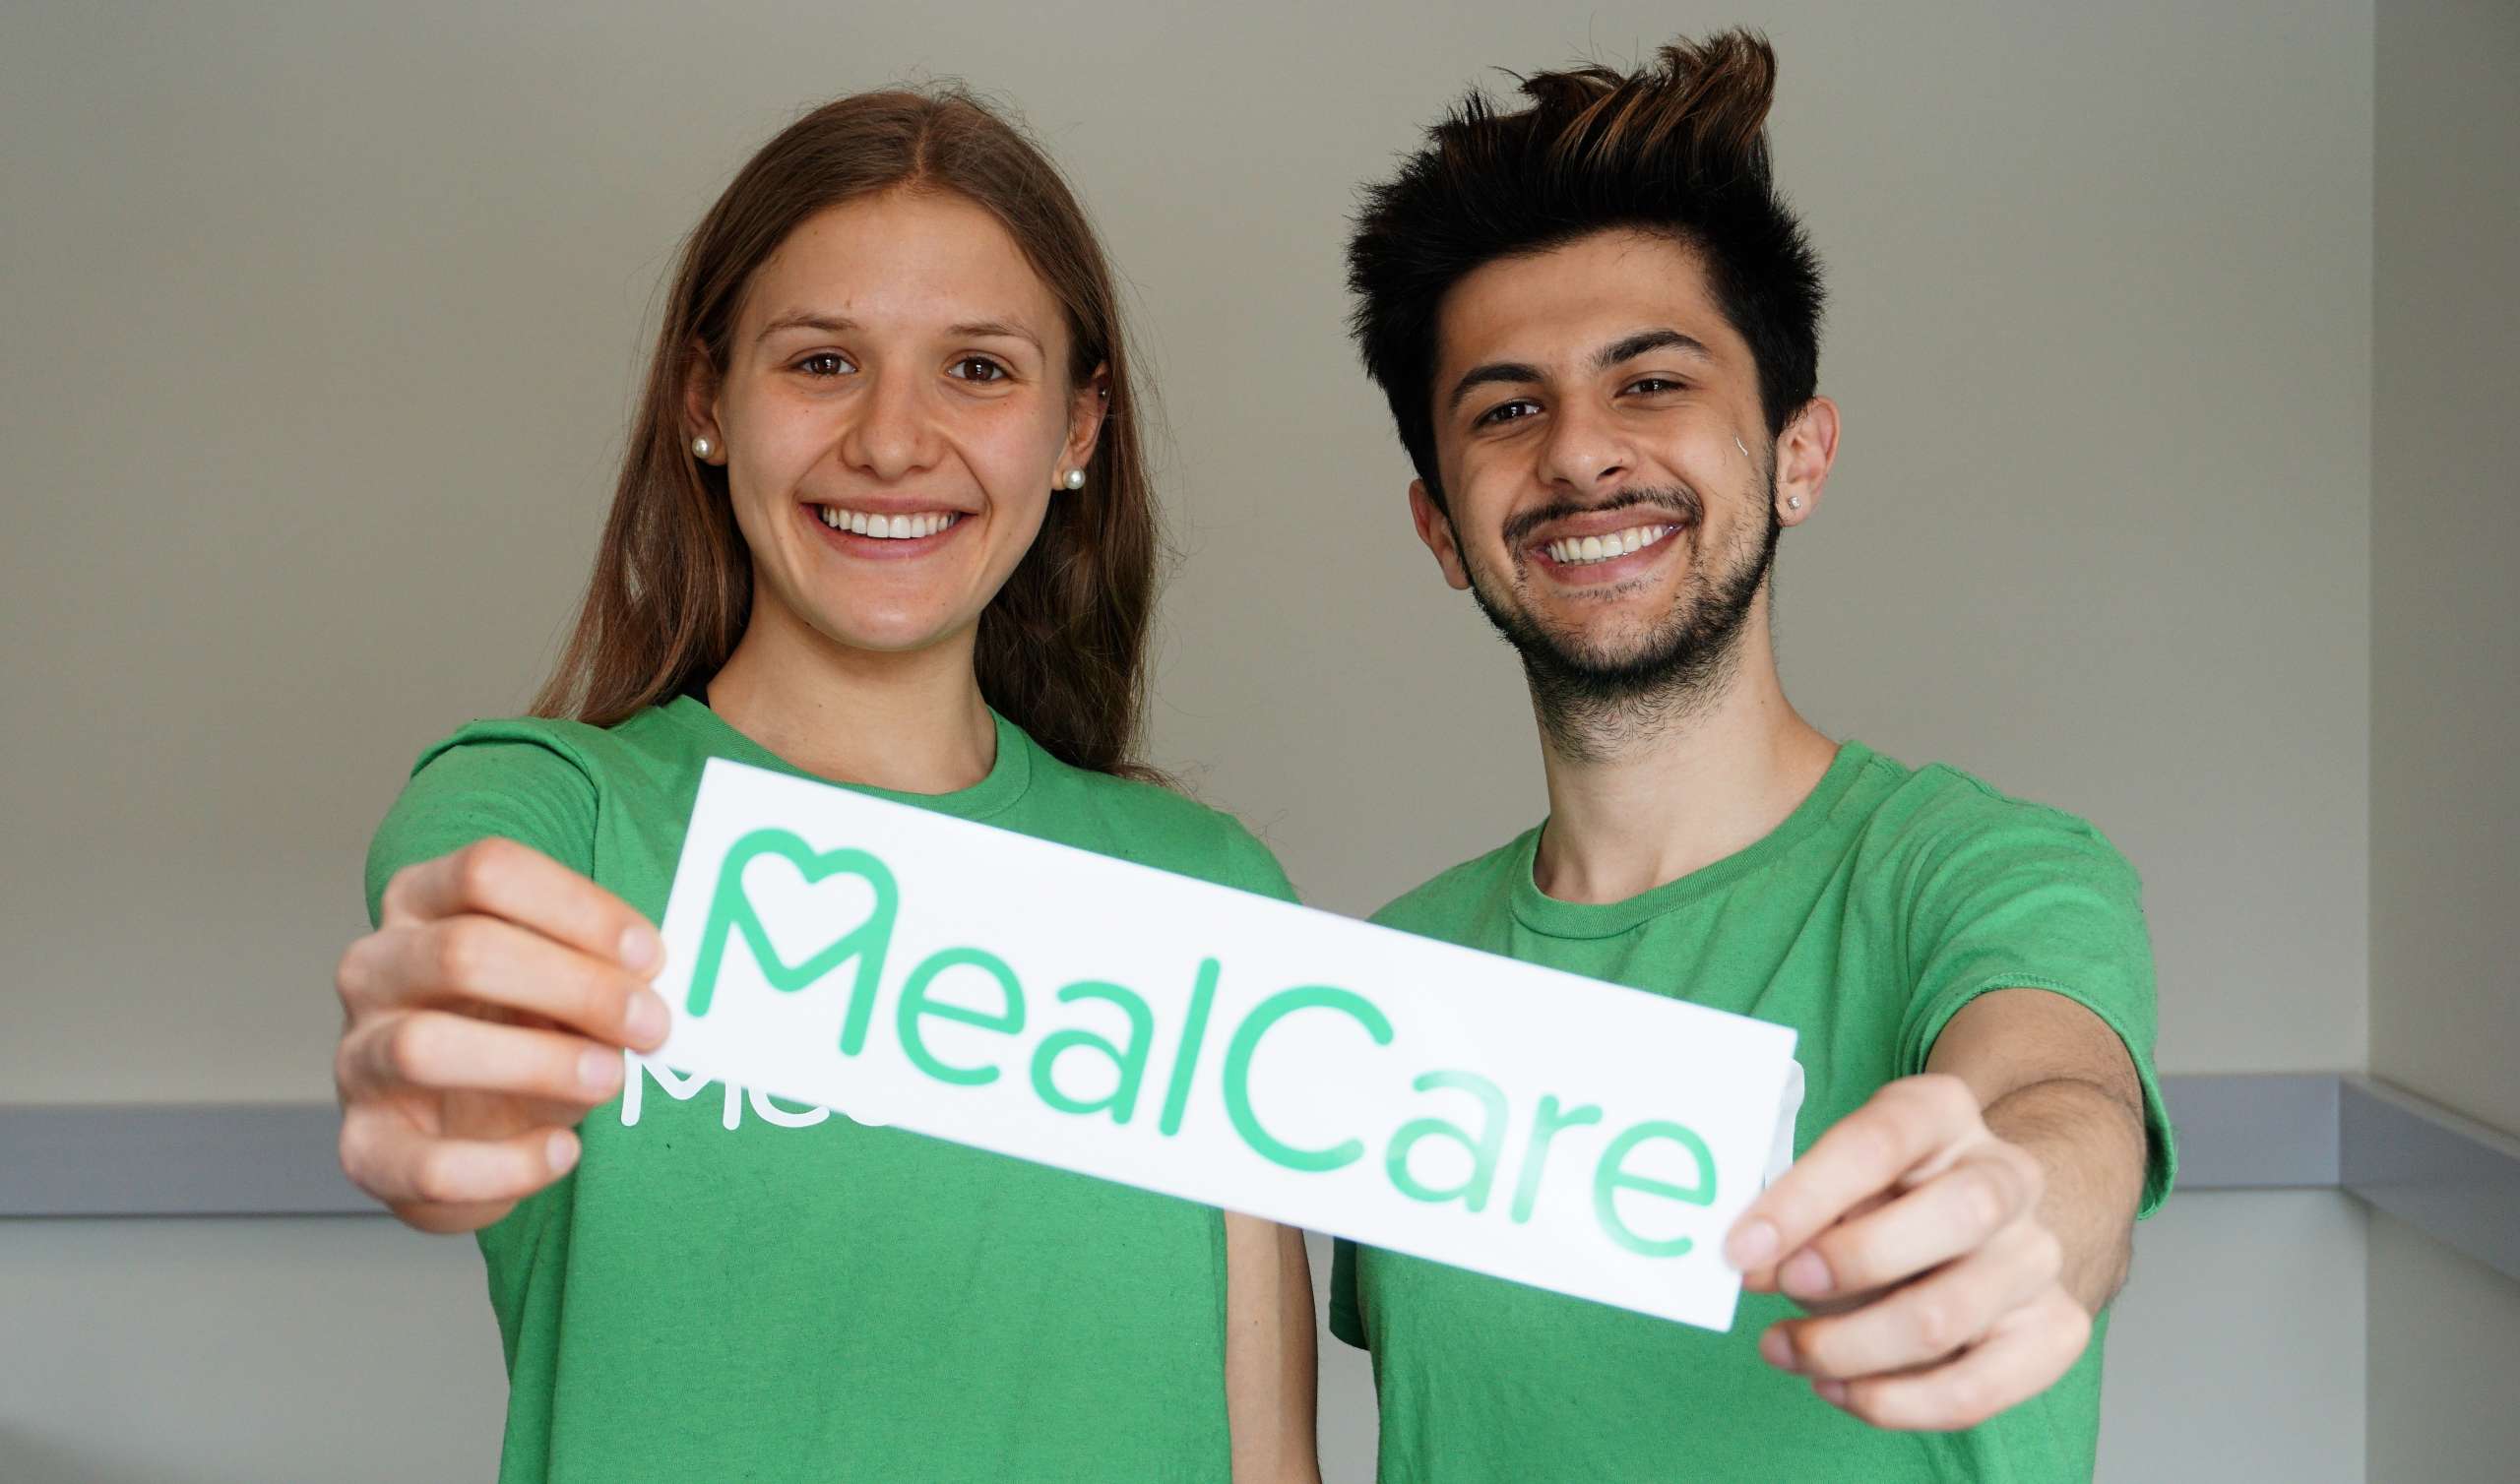 A woman and a man wearing matching gree nshirts hold a sign that reads MealCare